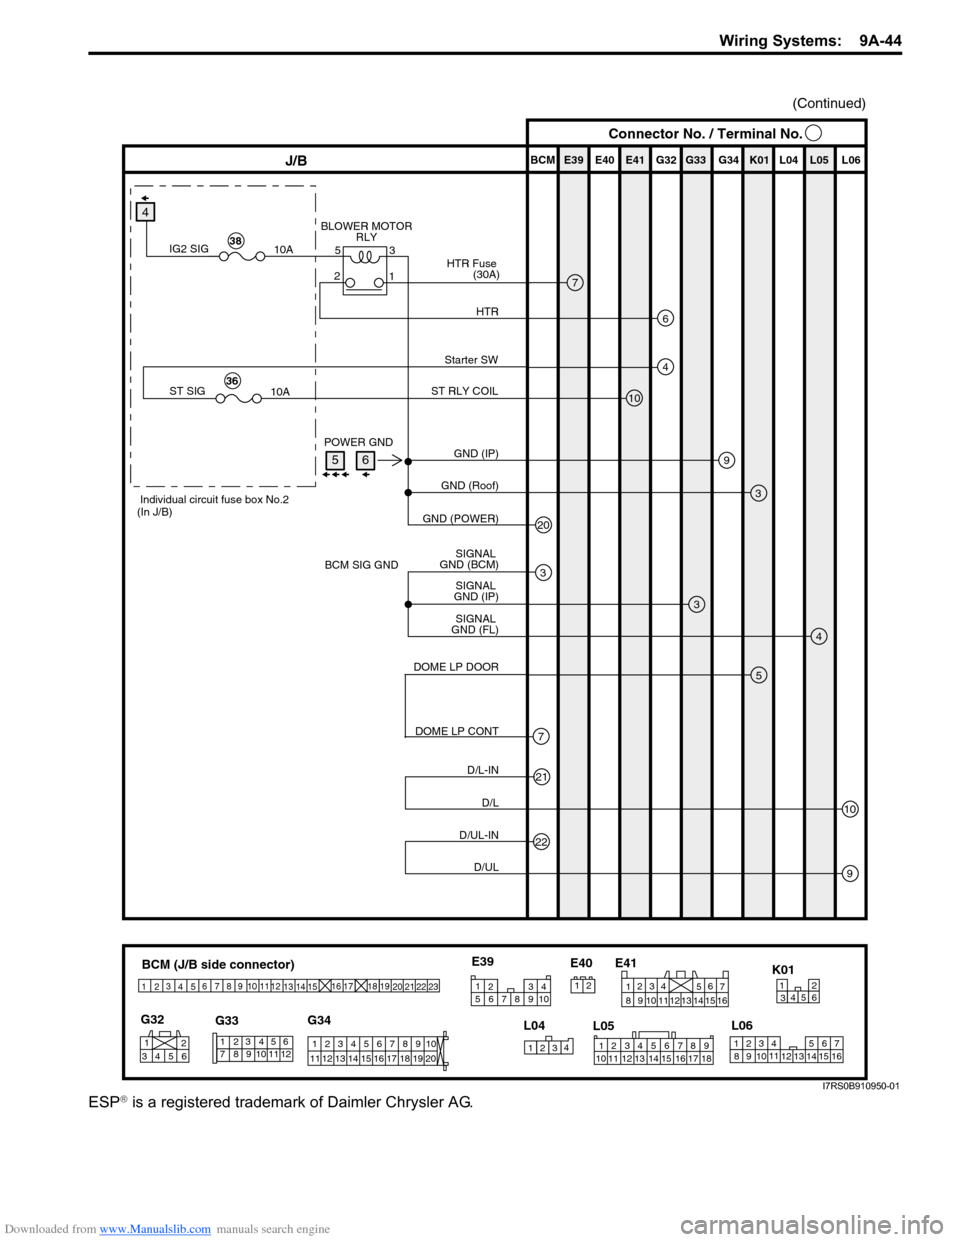 SUZUKI SWIFT 2007 2.G Service Owners Guide Downloaded from www.Manualslib.com manuals search engine Wiring Systems:  9A-44
ESP® is a registered trademark of Daimler Chrysler AG.
BCM (J/B side connector)
34
1
2 5
15
14
12
13
10
11
9
8
6
7
17
1